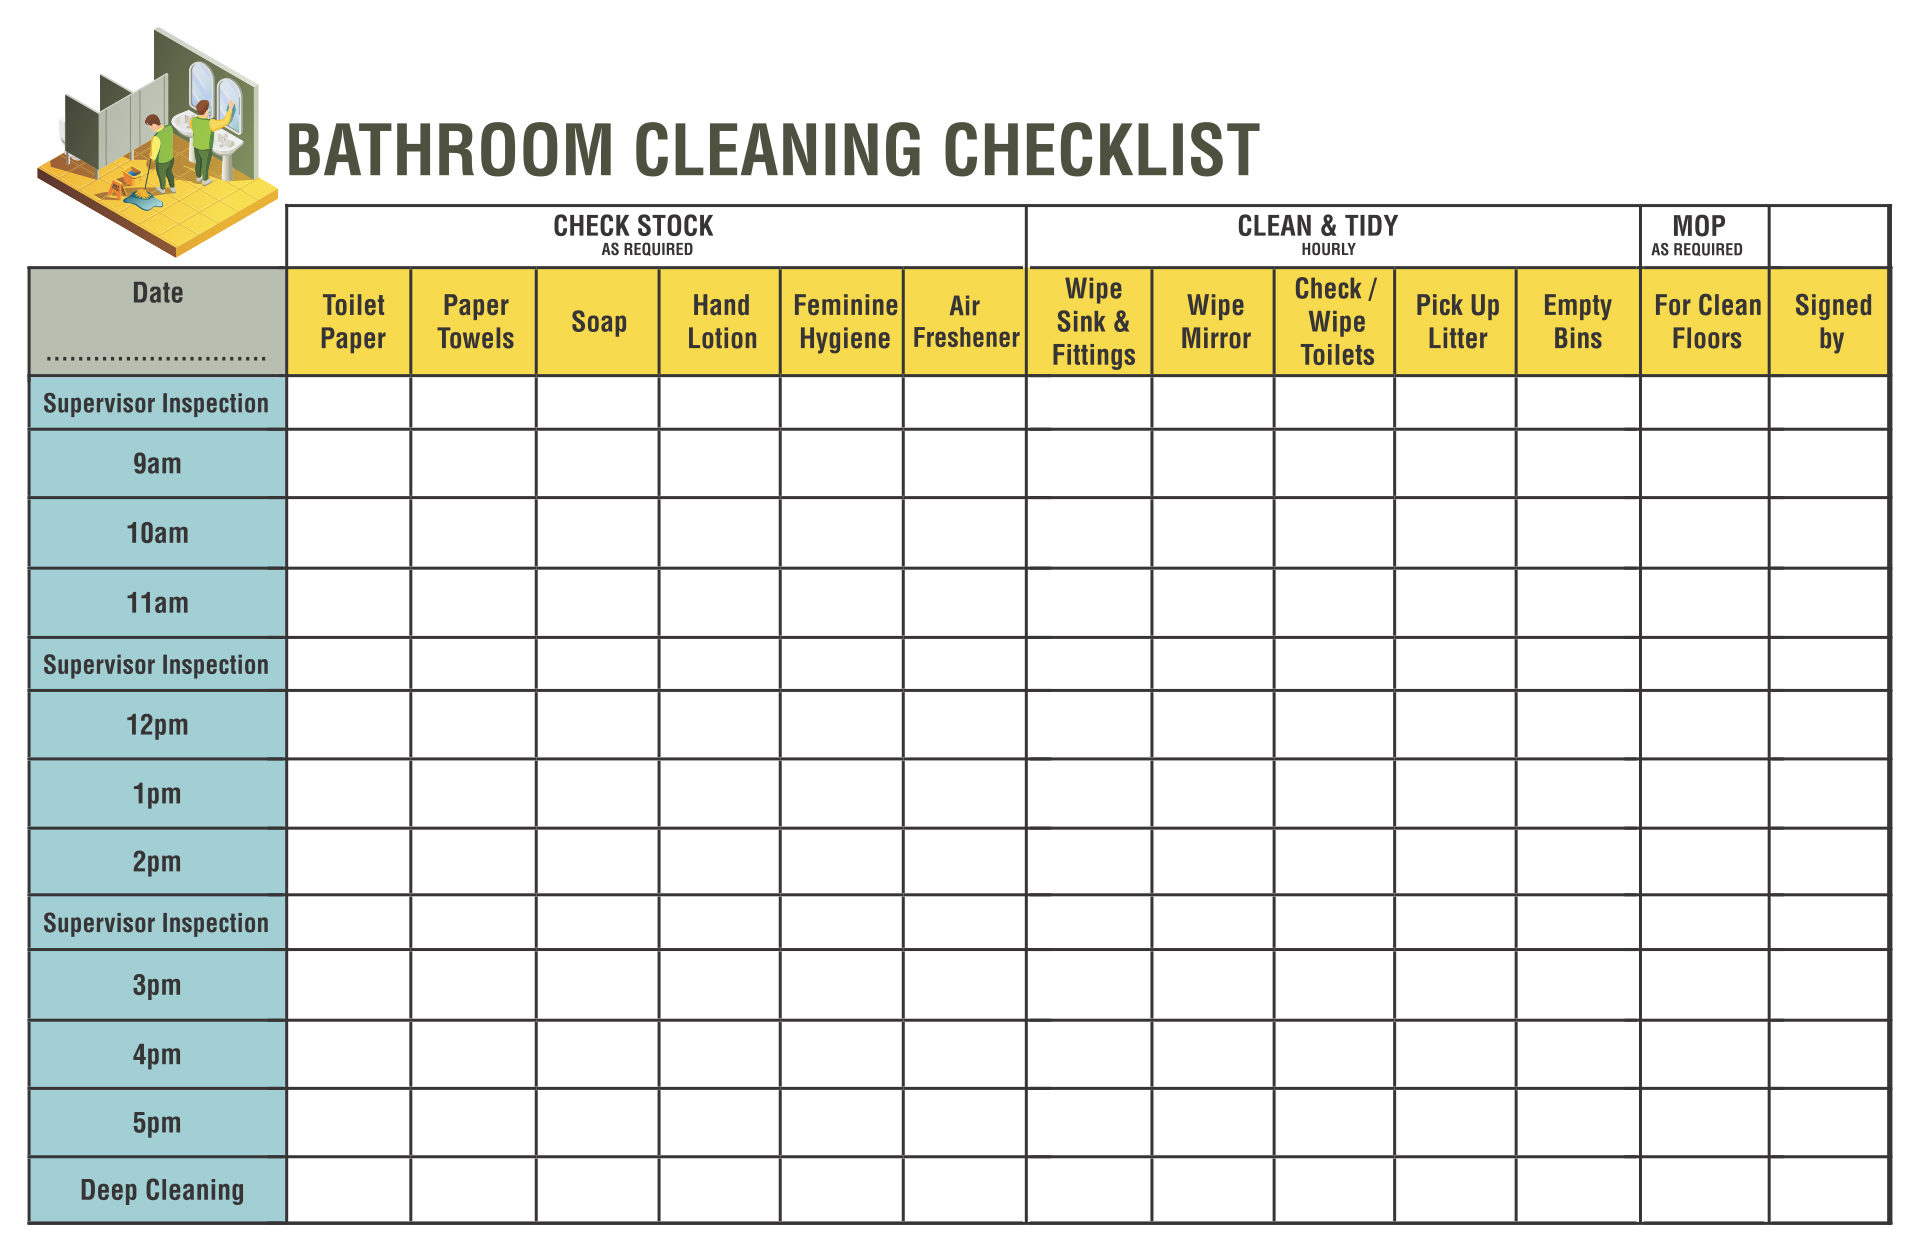 Bathroom Cleaning Checklist For Employees